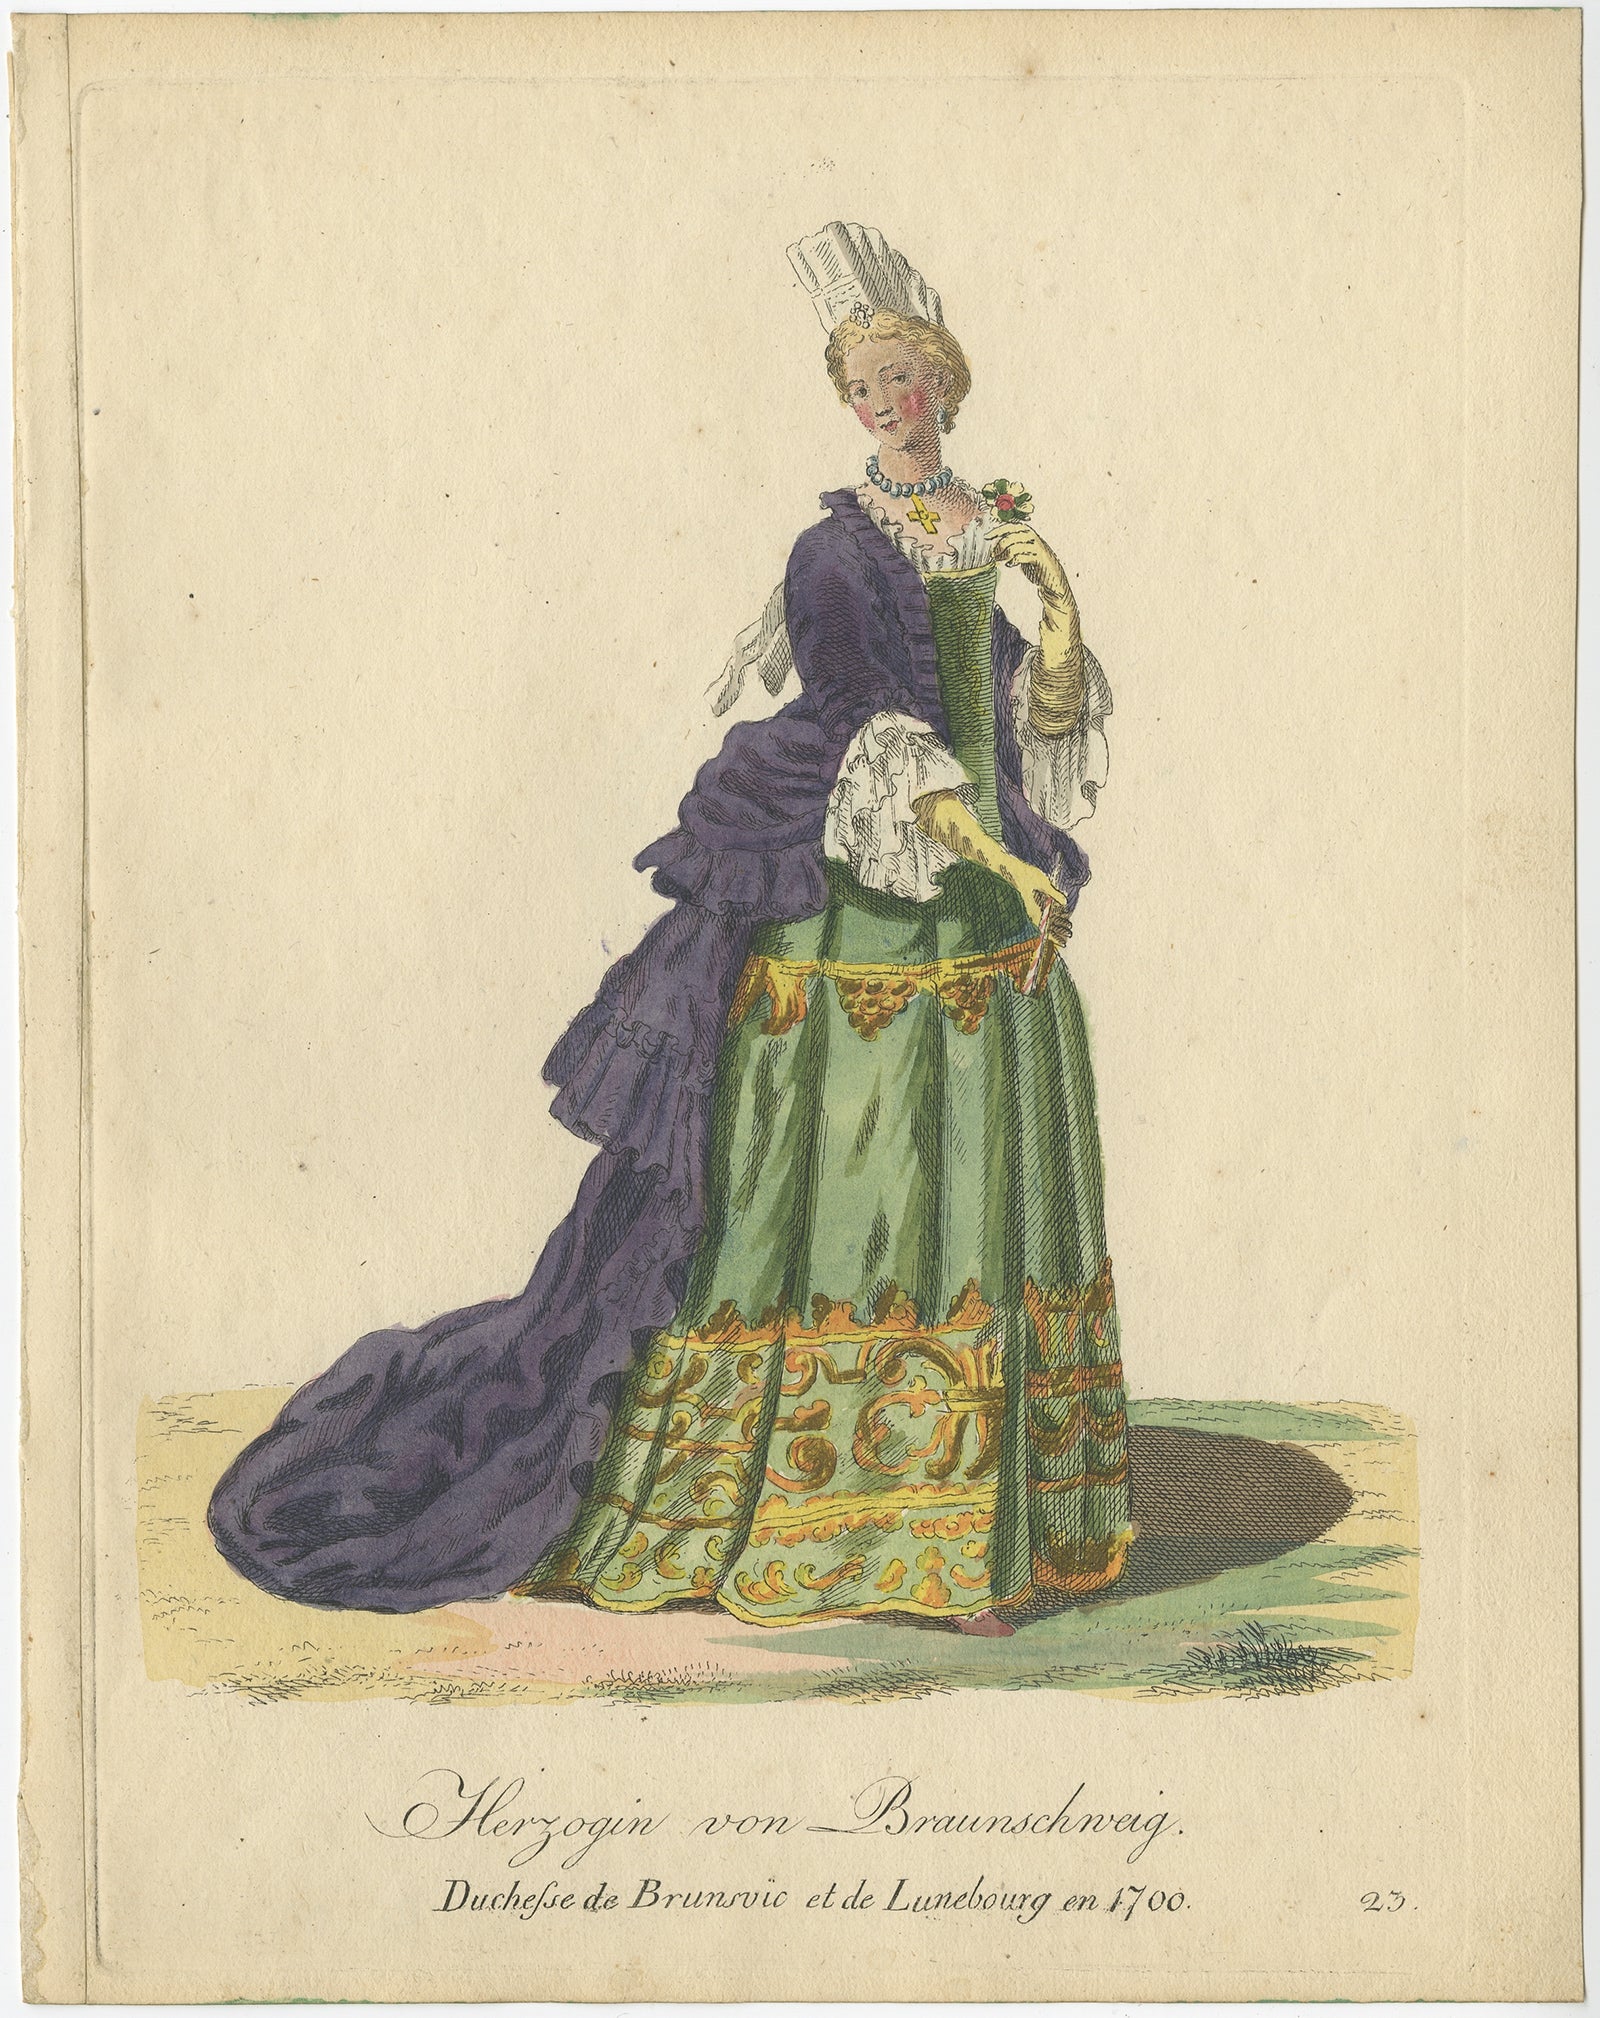 Print of the Duchess of Braunschweig or Brunswick and Lunebourg, Germany, 1805